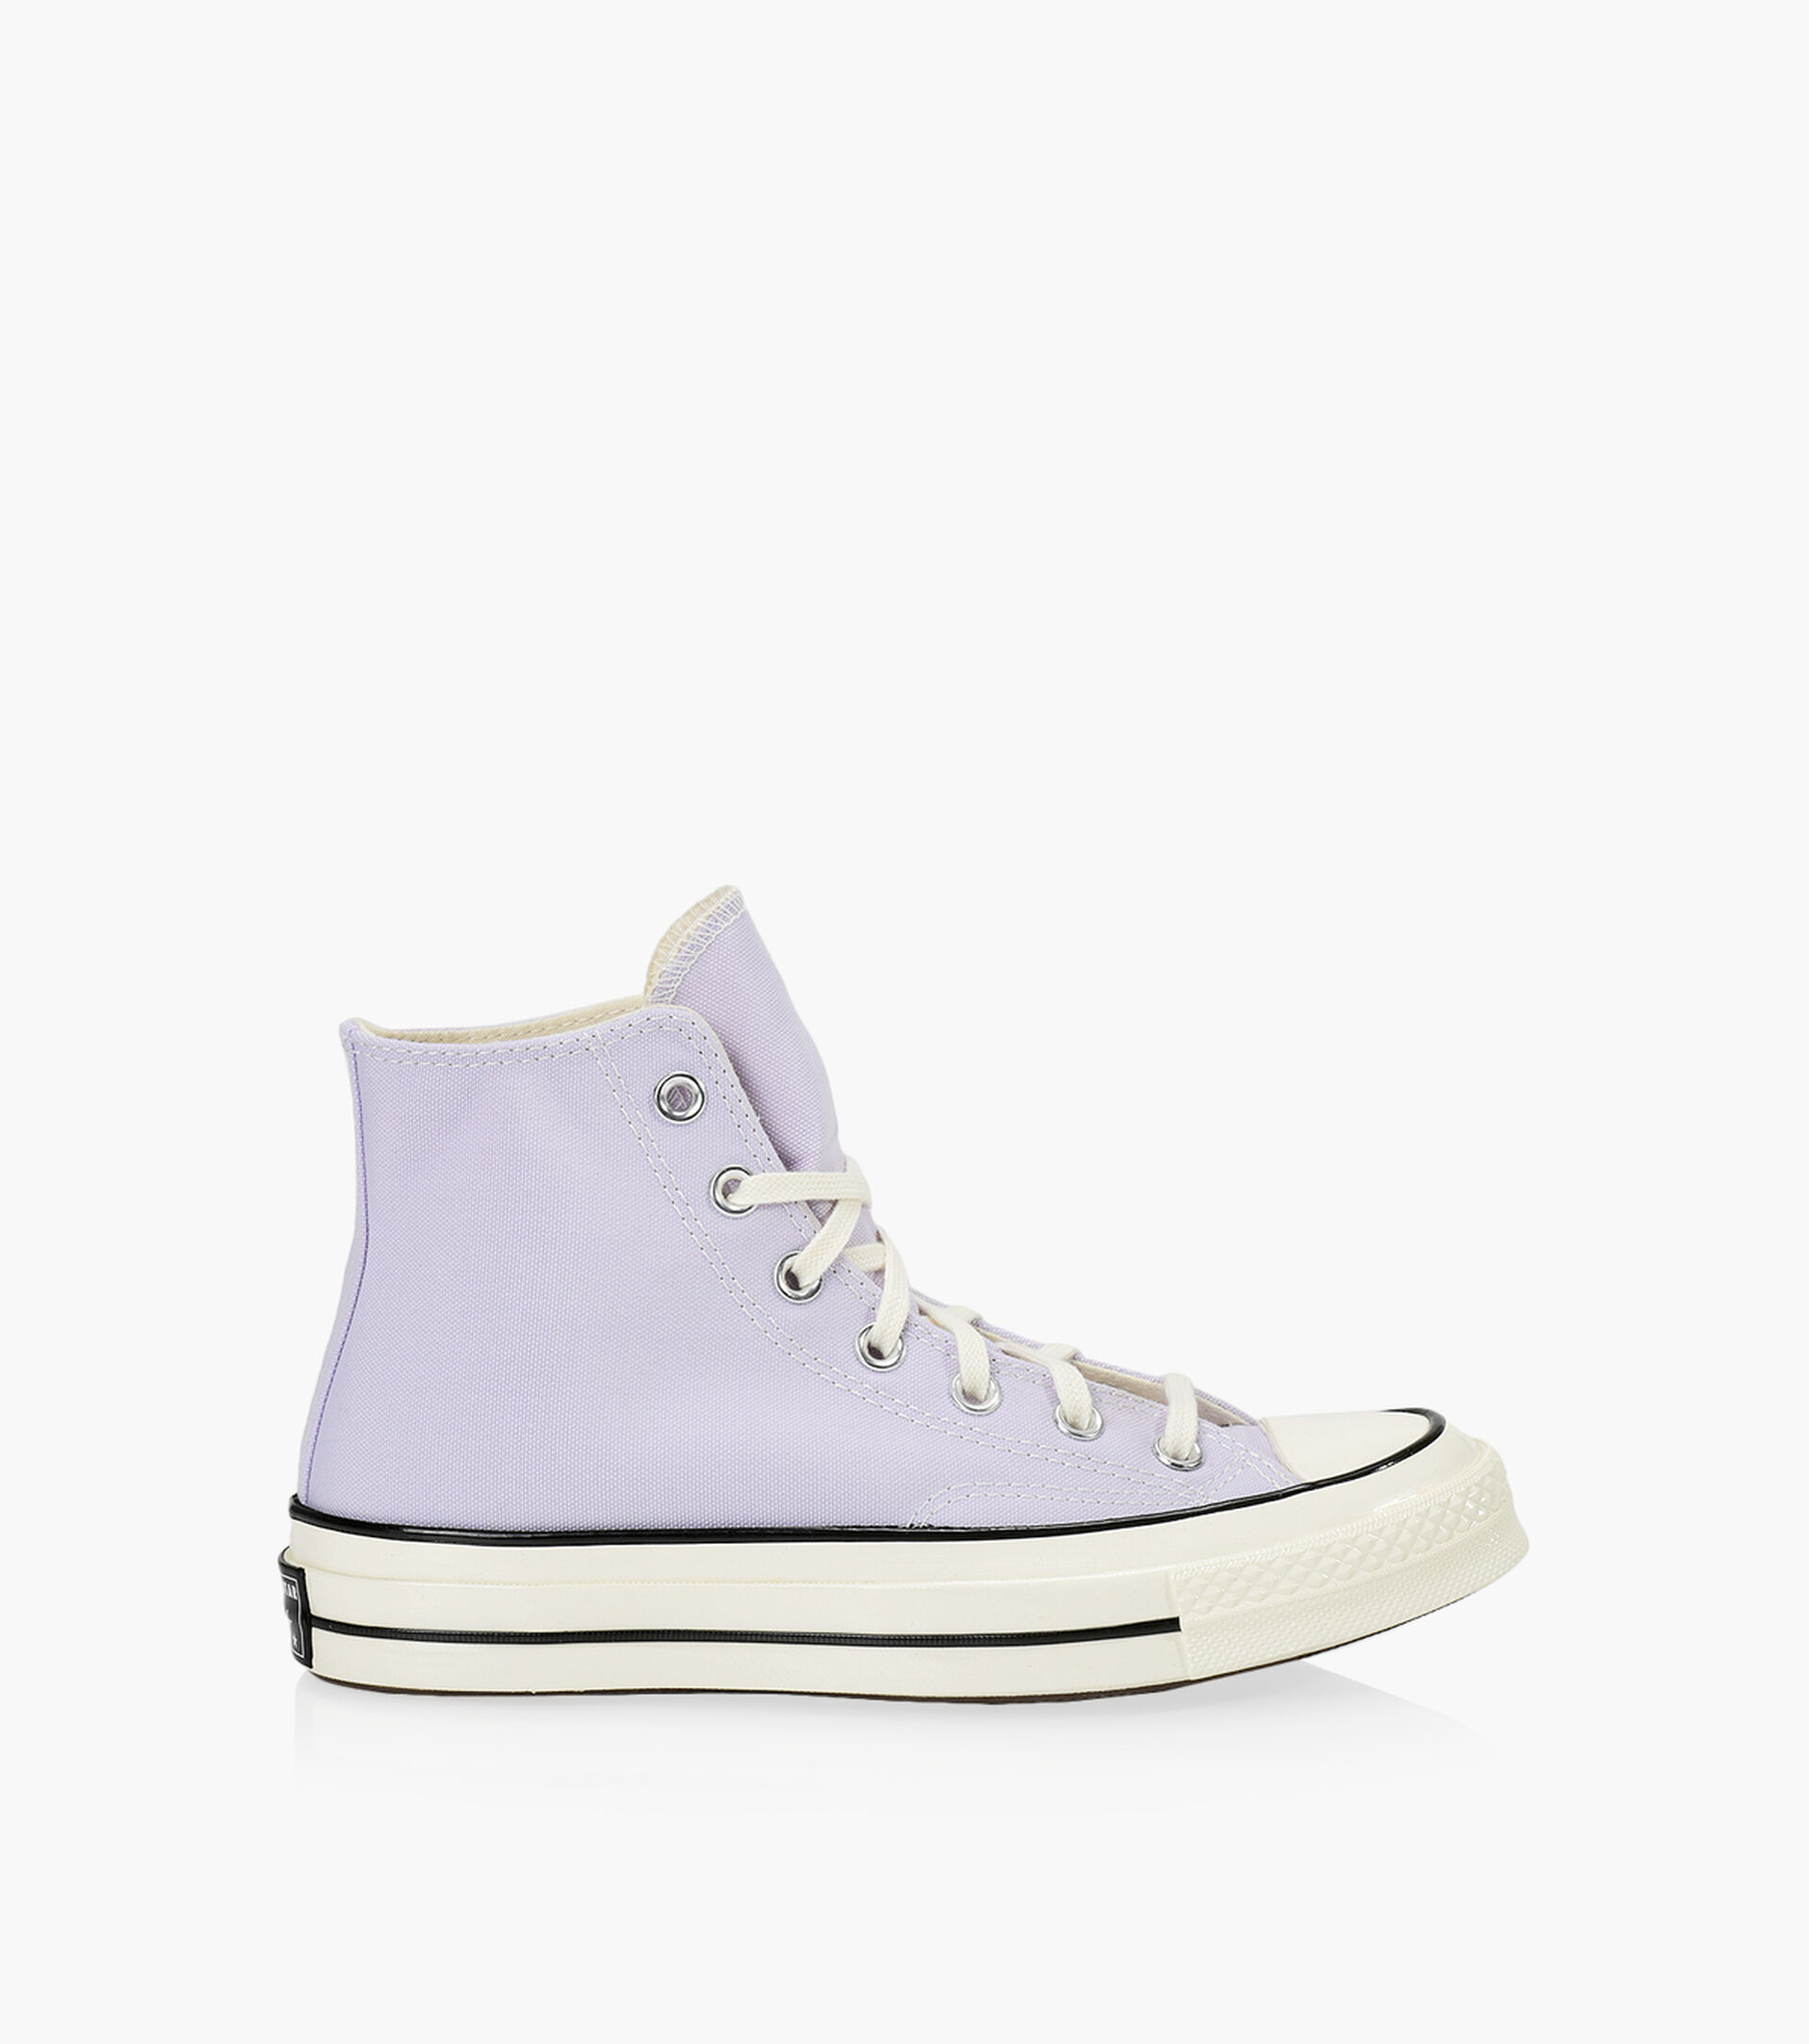 CONVERSE CHUCK 70 HIGH TOP - Fabric | Browns Shoes